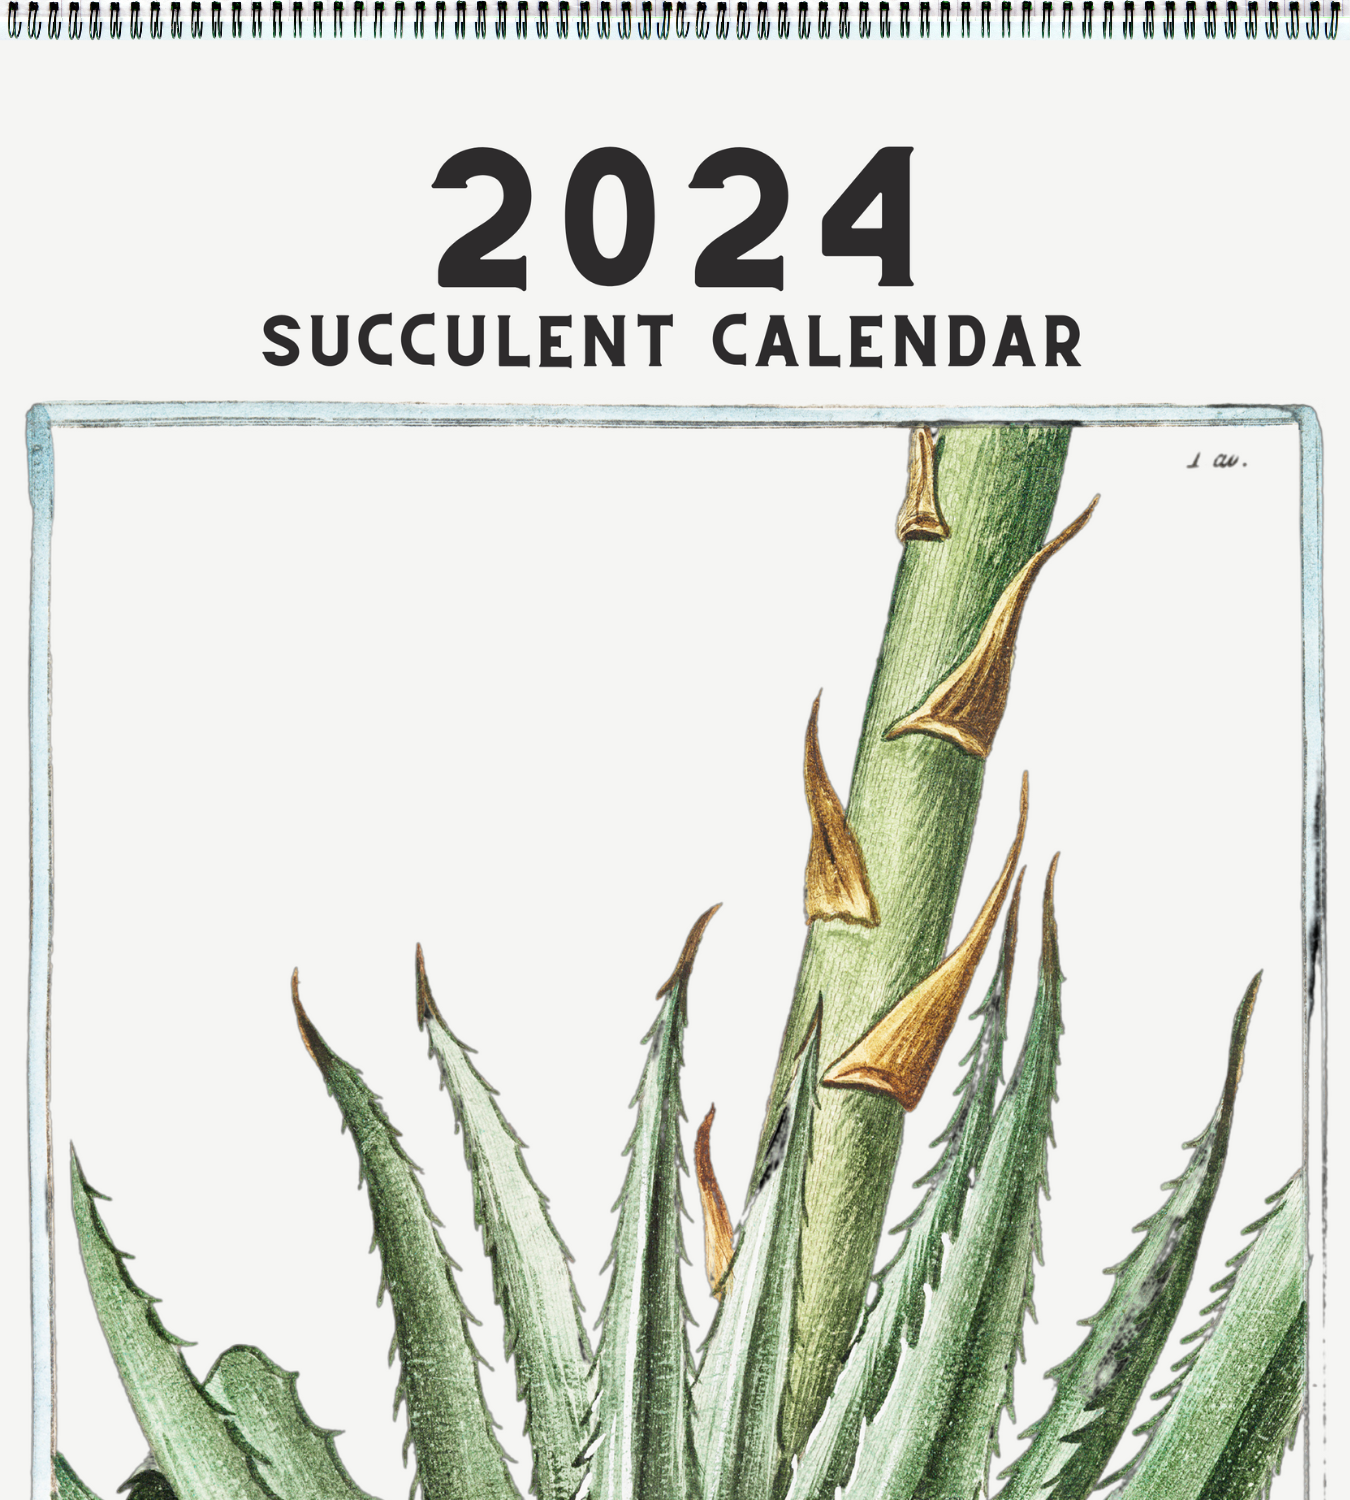 PERIODIQUE CALENDRIER CHATS 2024